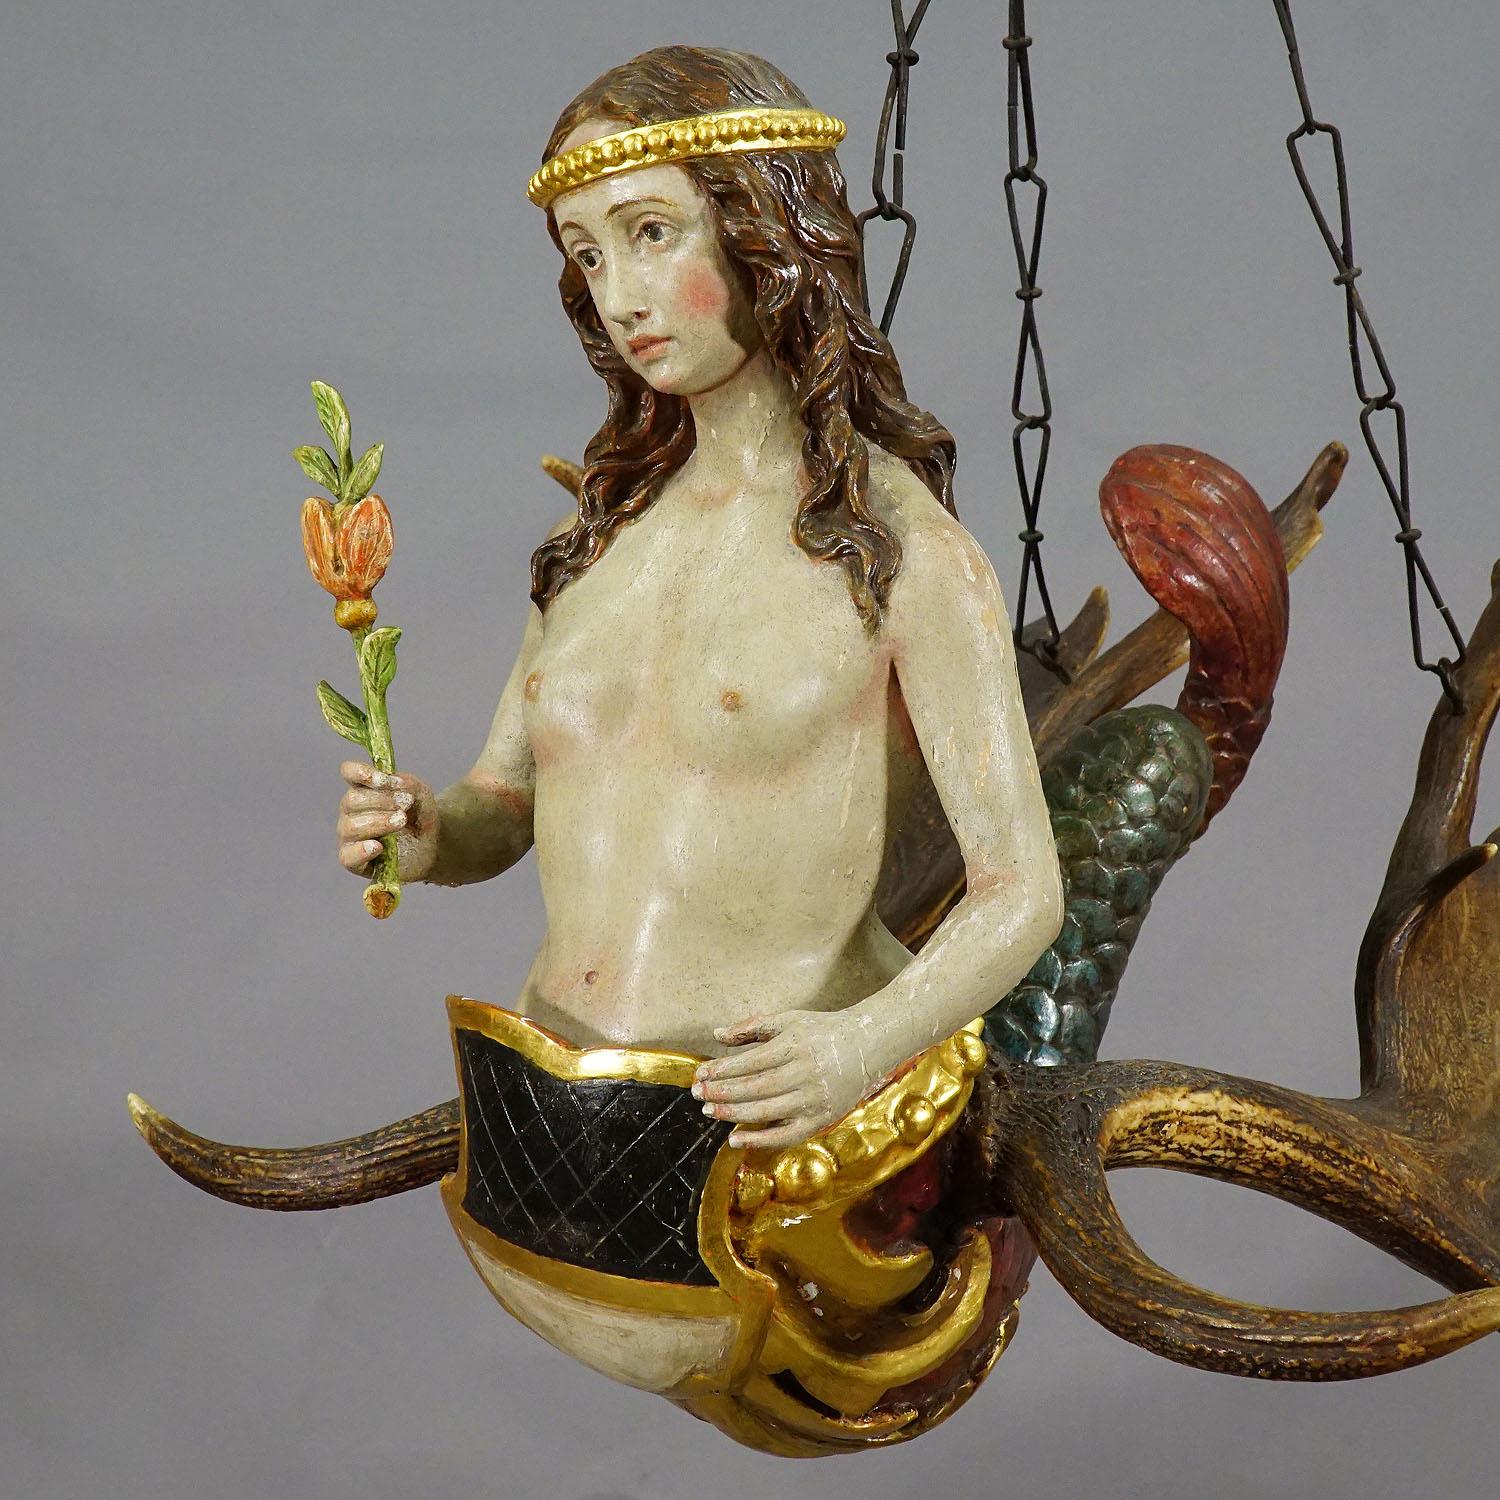 A wonderful antique lüsterweibchen with a carved wooden sculpture of a mermaid with fishtail. The maid is holding a flower and a heraldic blazon. Mounted on the sculpture are a pair of original fallow deer antlers and a hand forged iron suspension.